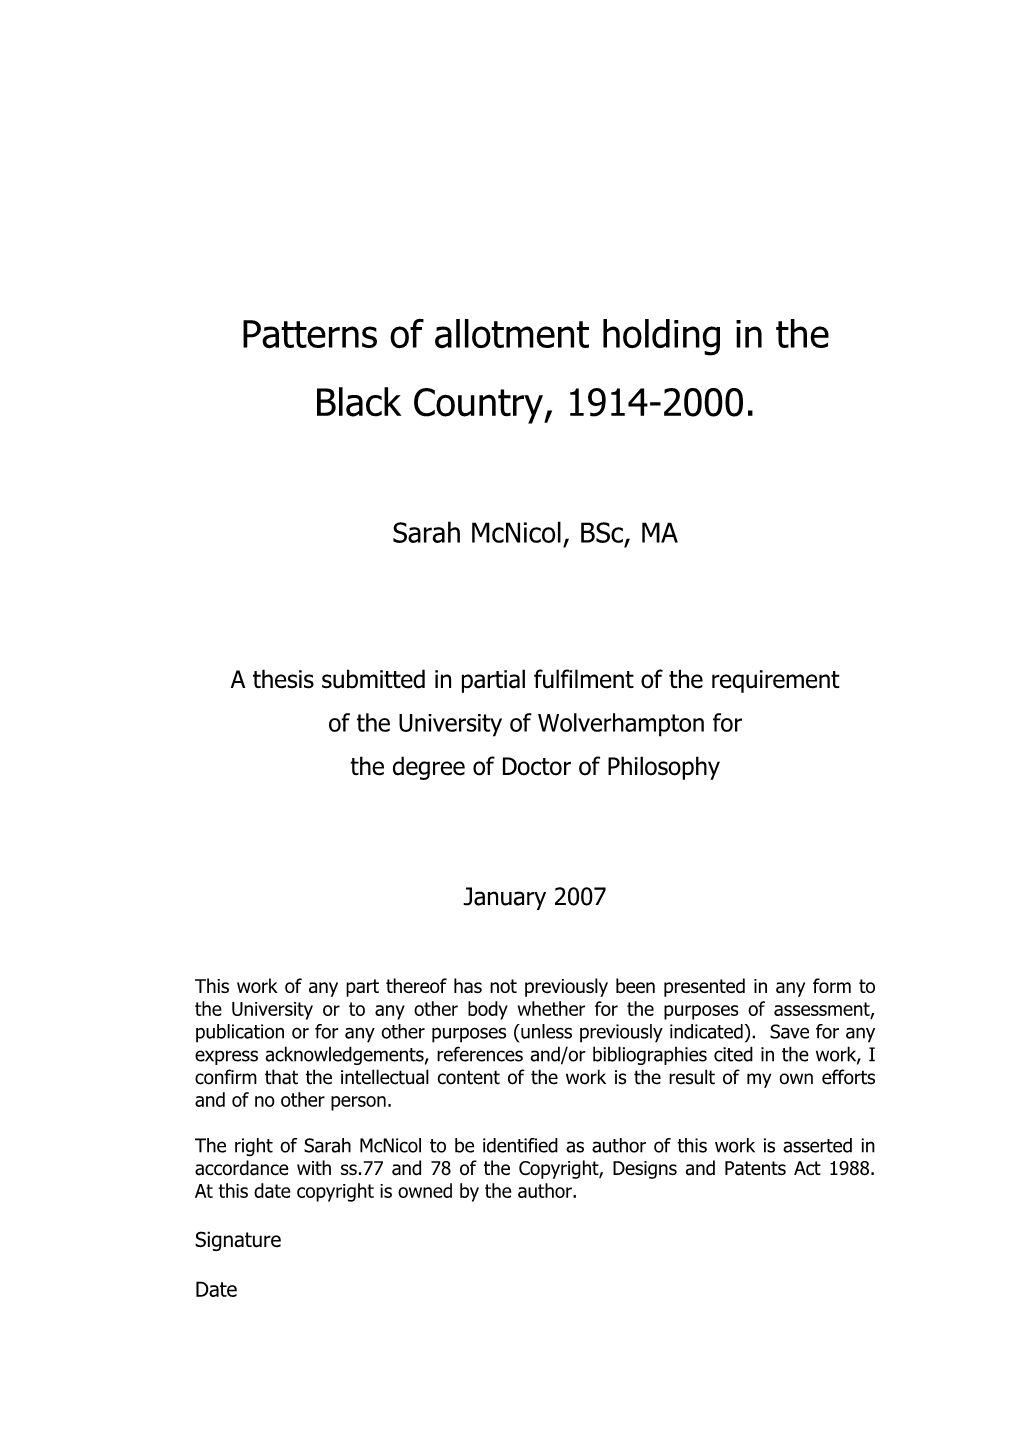 Patterns of Allotment Holding in the Black Country, 1914-2000